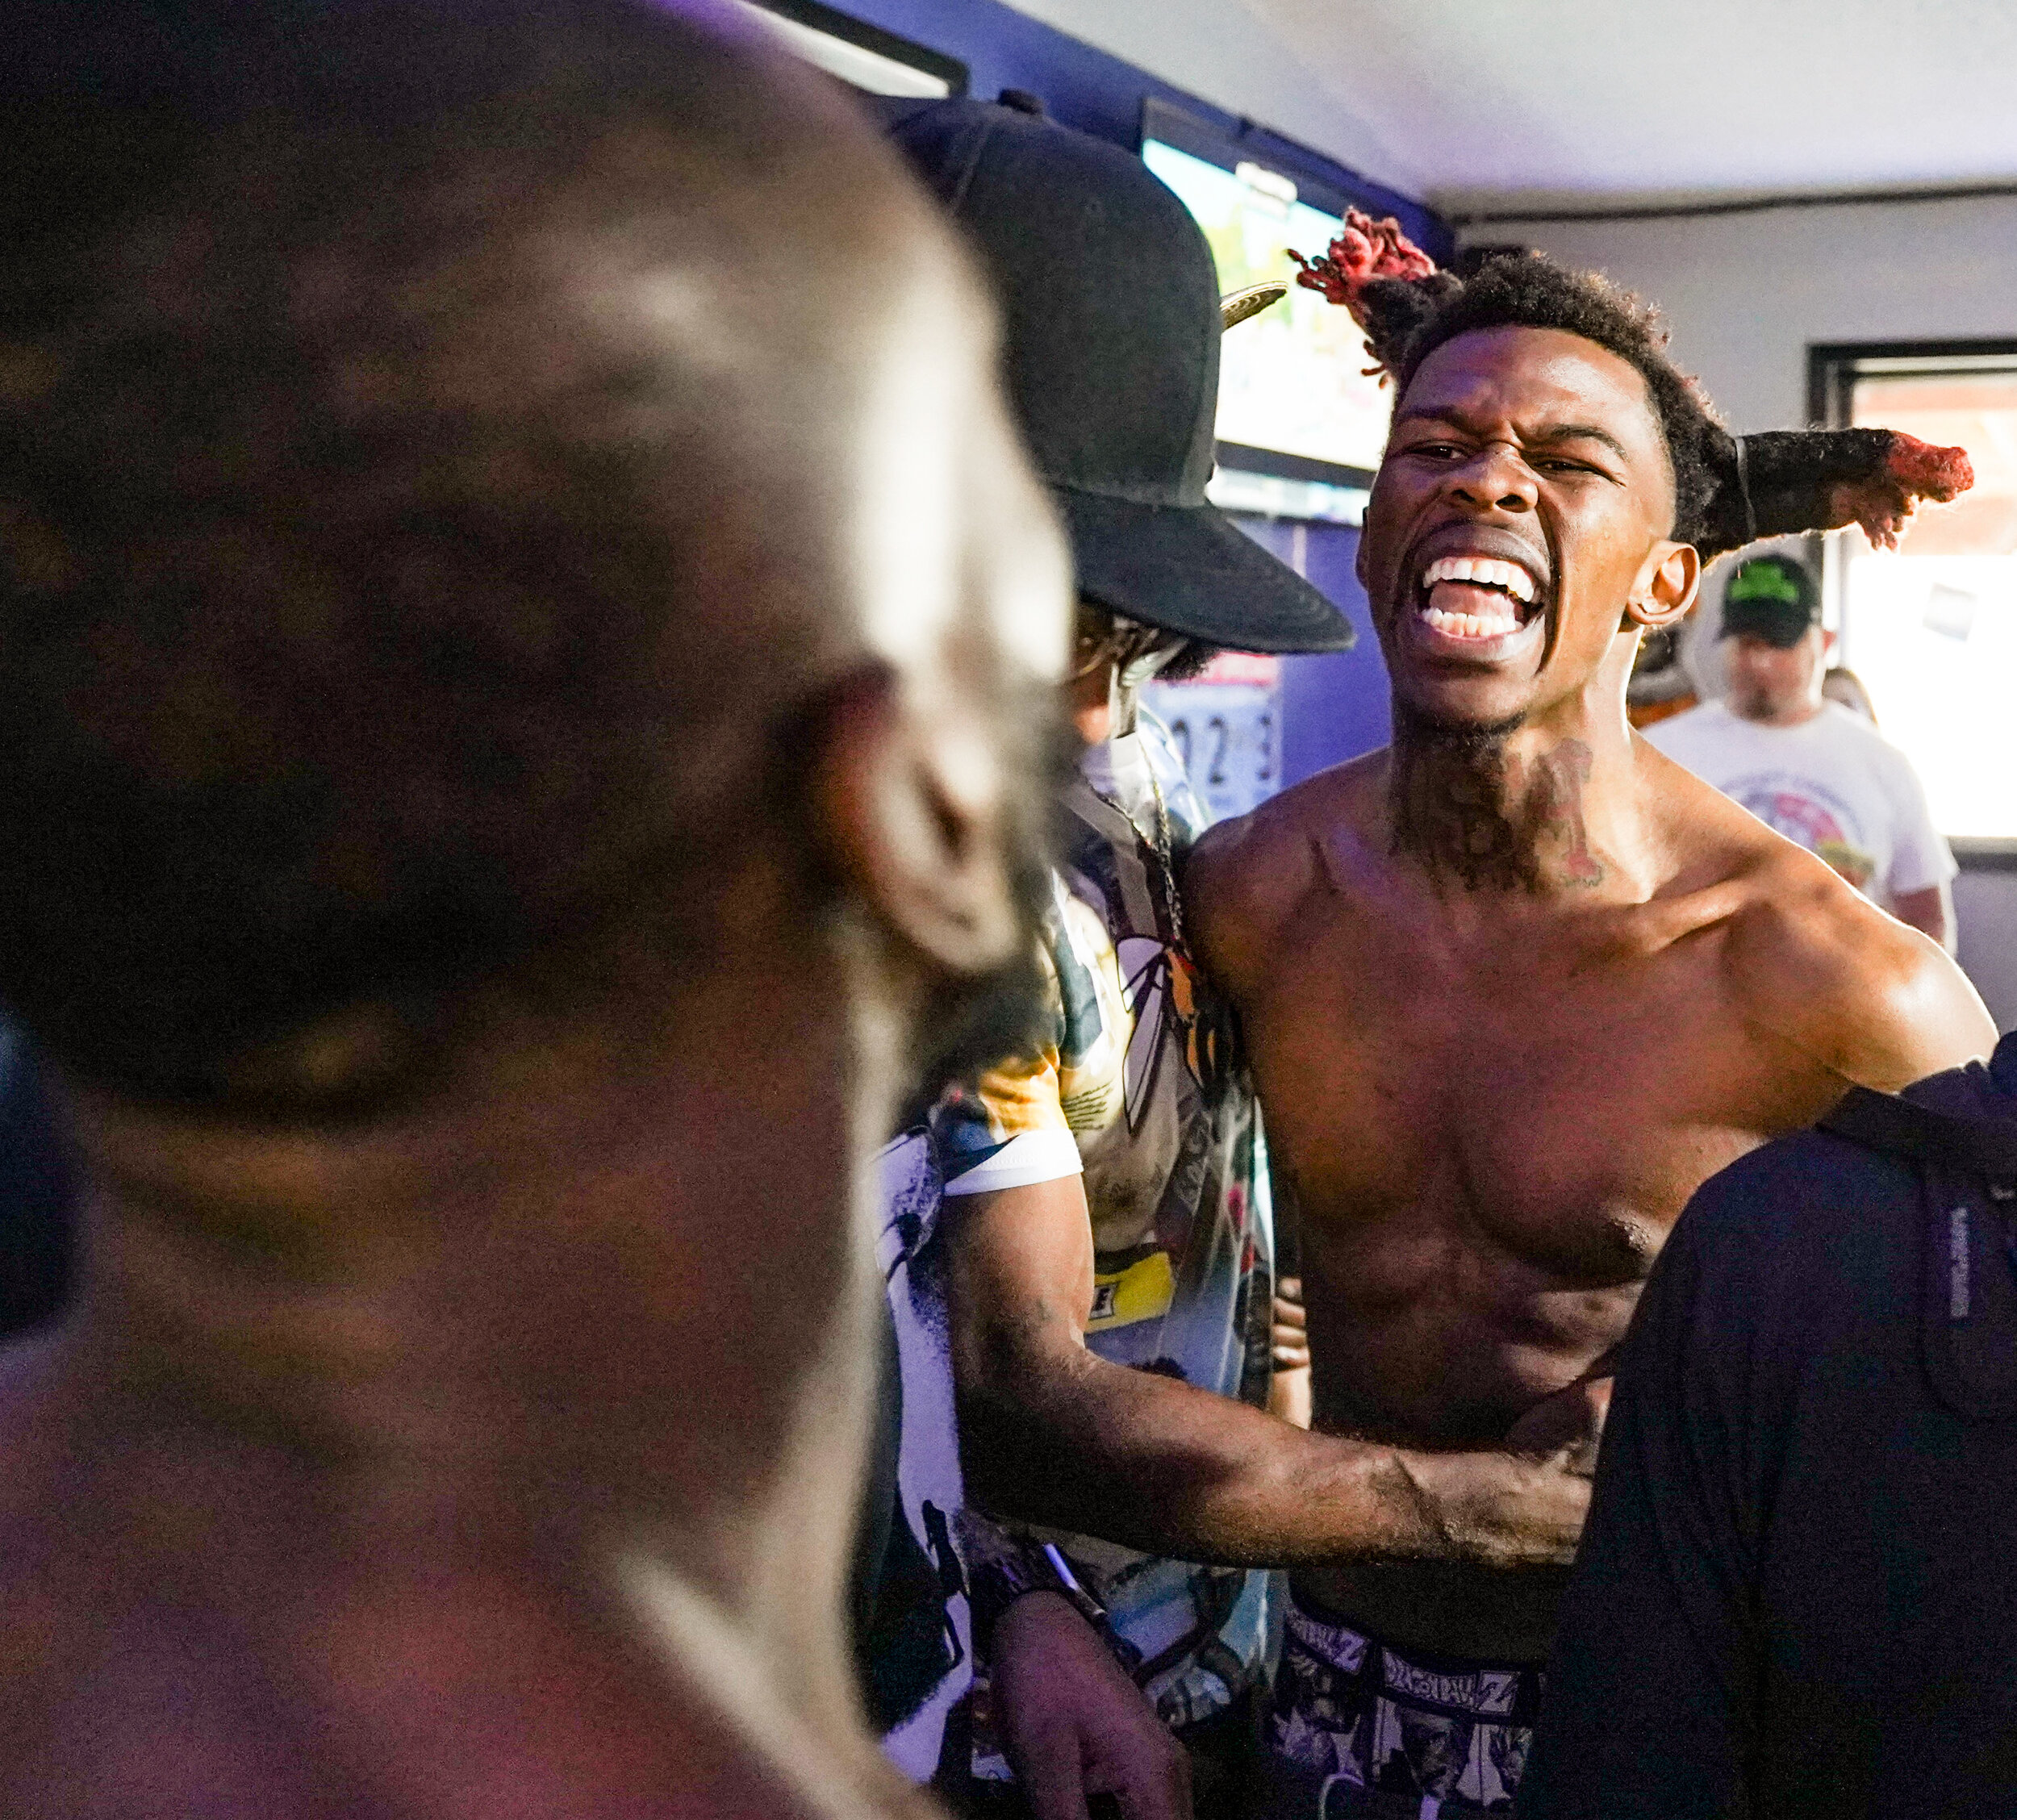  Pachino Hill starts yelling after Jarvis Williams of St. Louis poked his forehead during their weigh-in at Gilly’s Corner Tap in Davenport, Friday, June 18, 2021. 